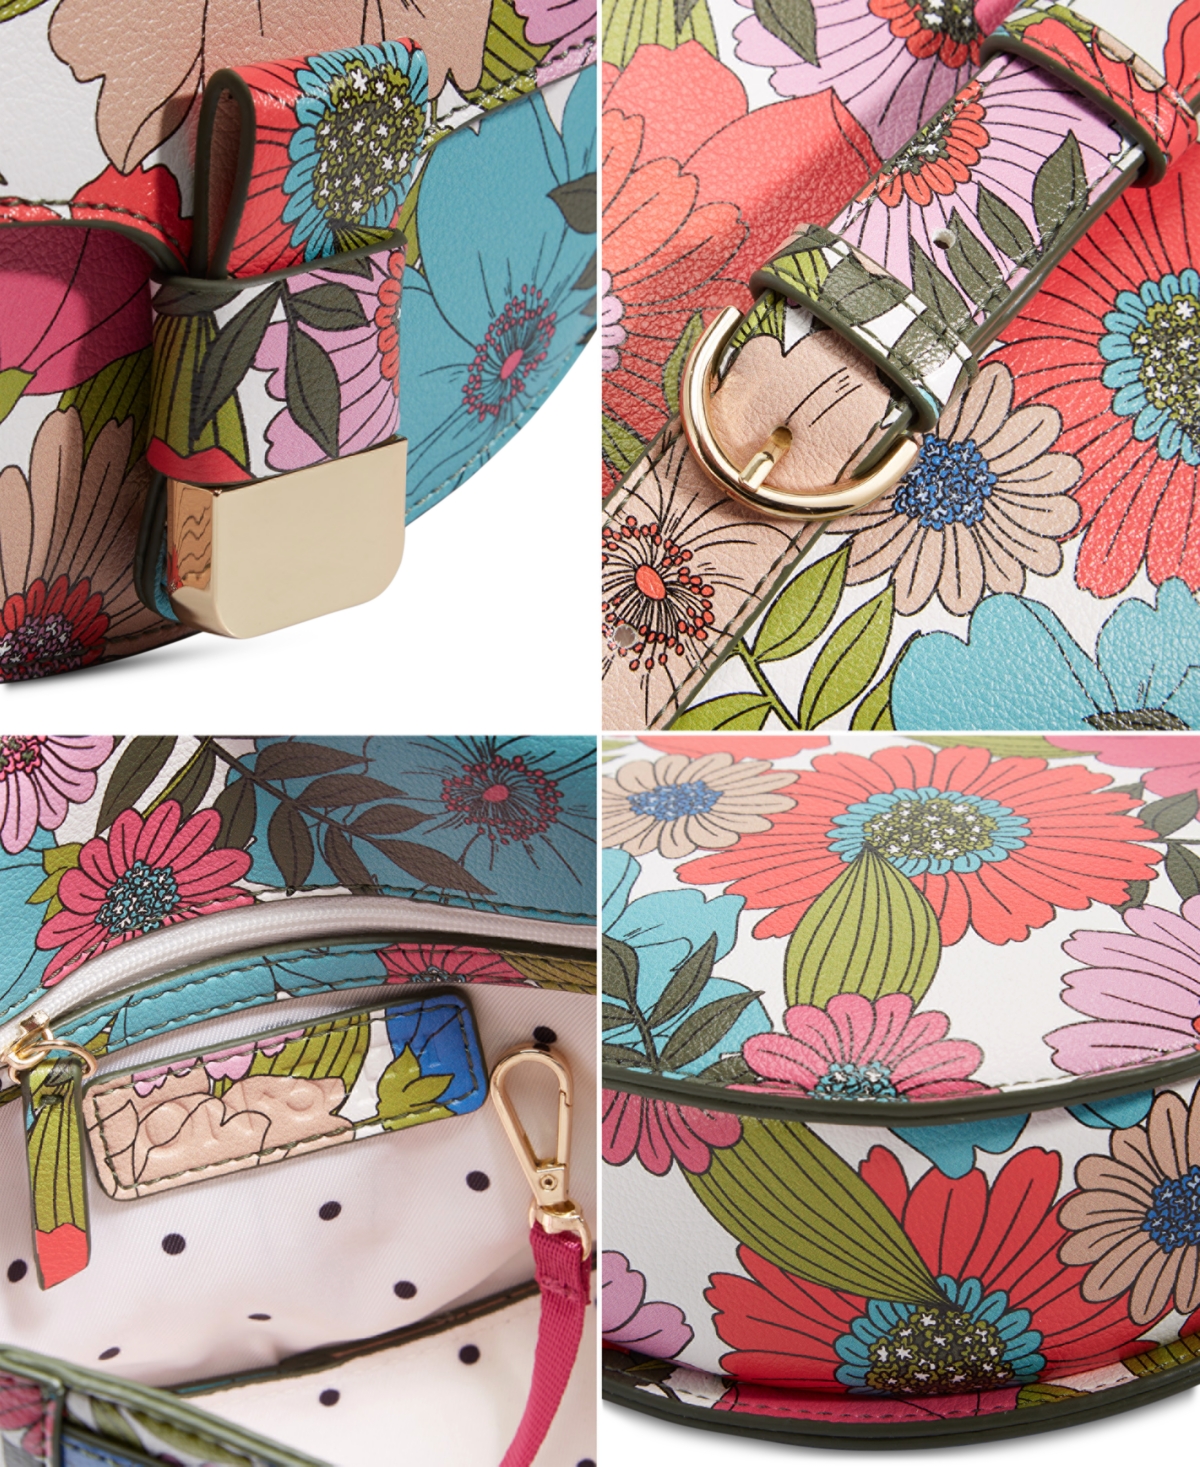 Shop On 34th Holmme Printed Crossbody Bag, Created For Macy's In Botanical